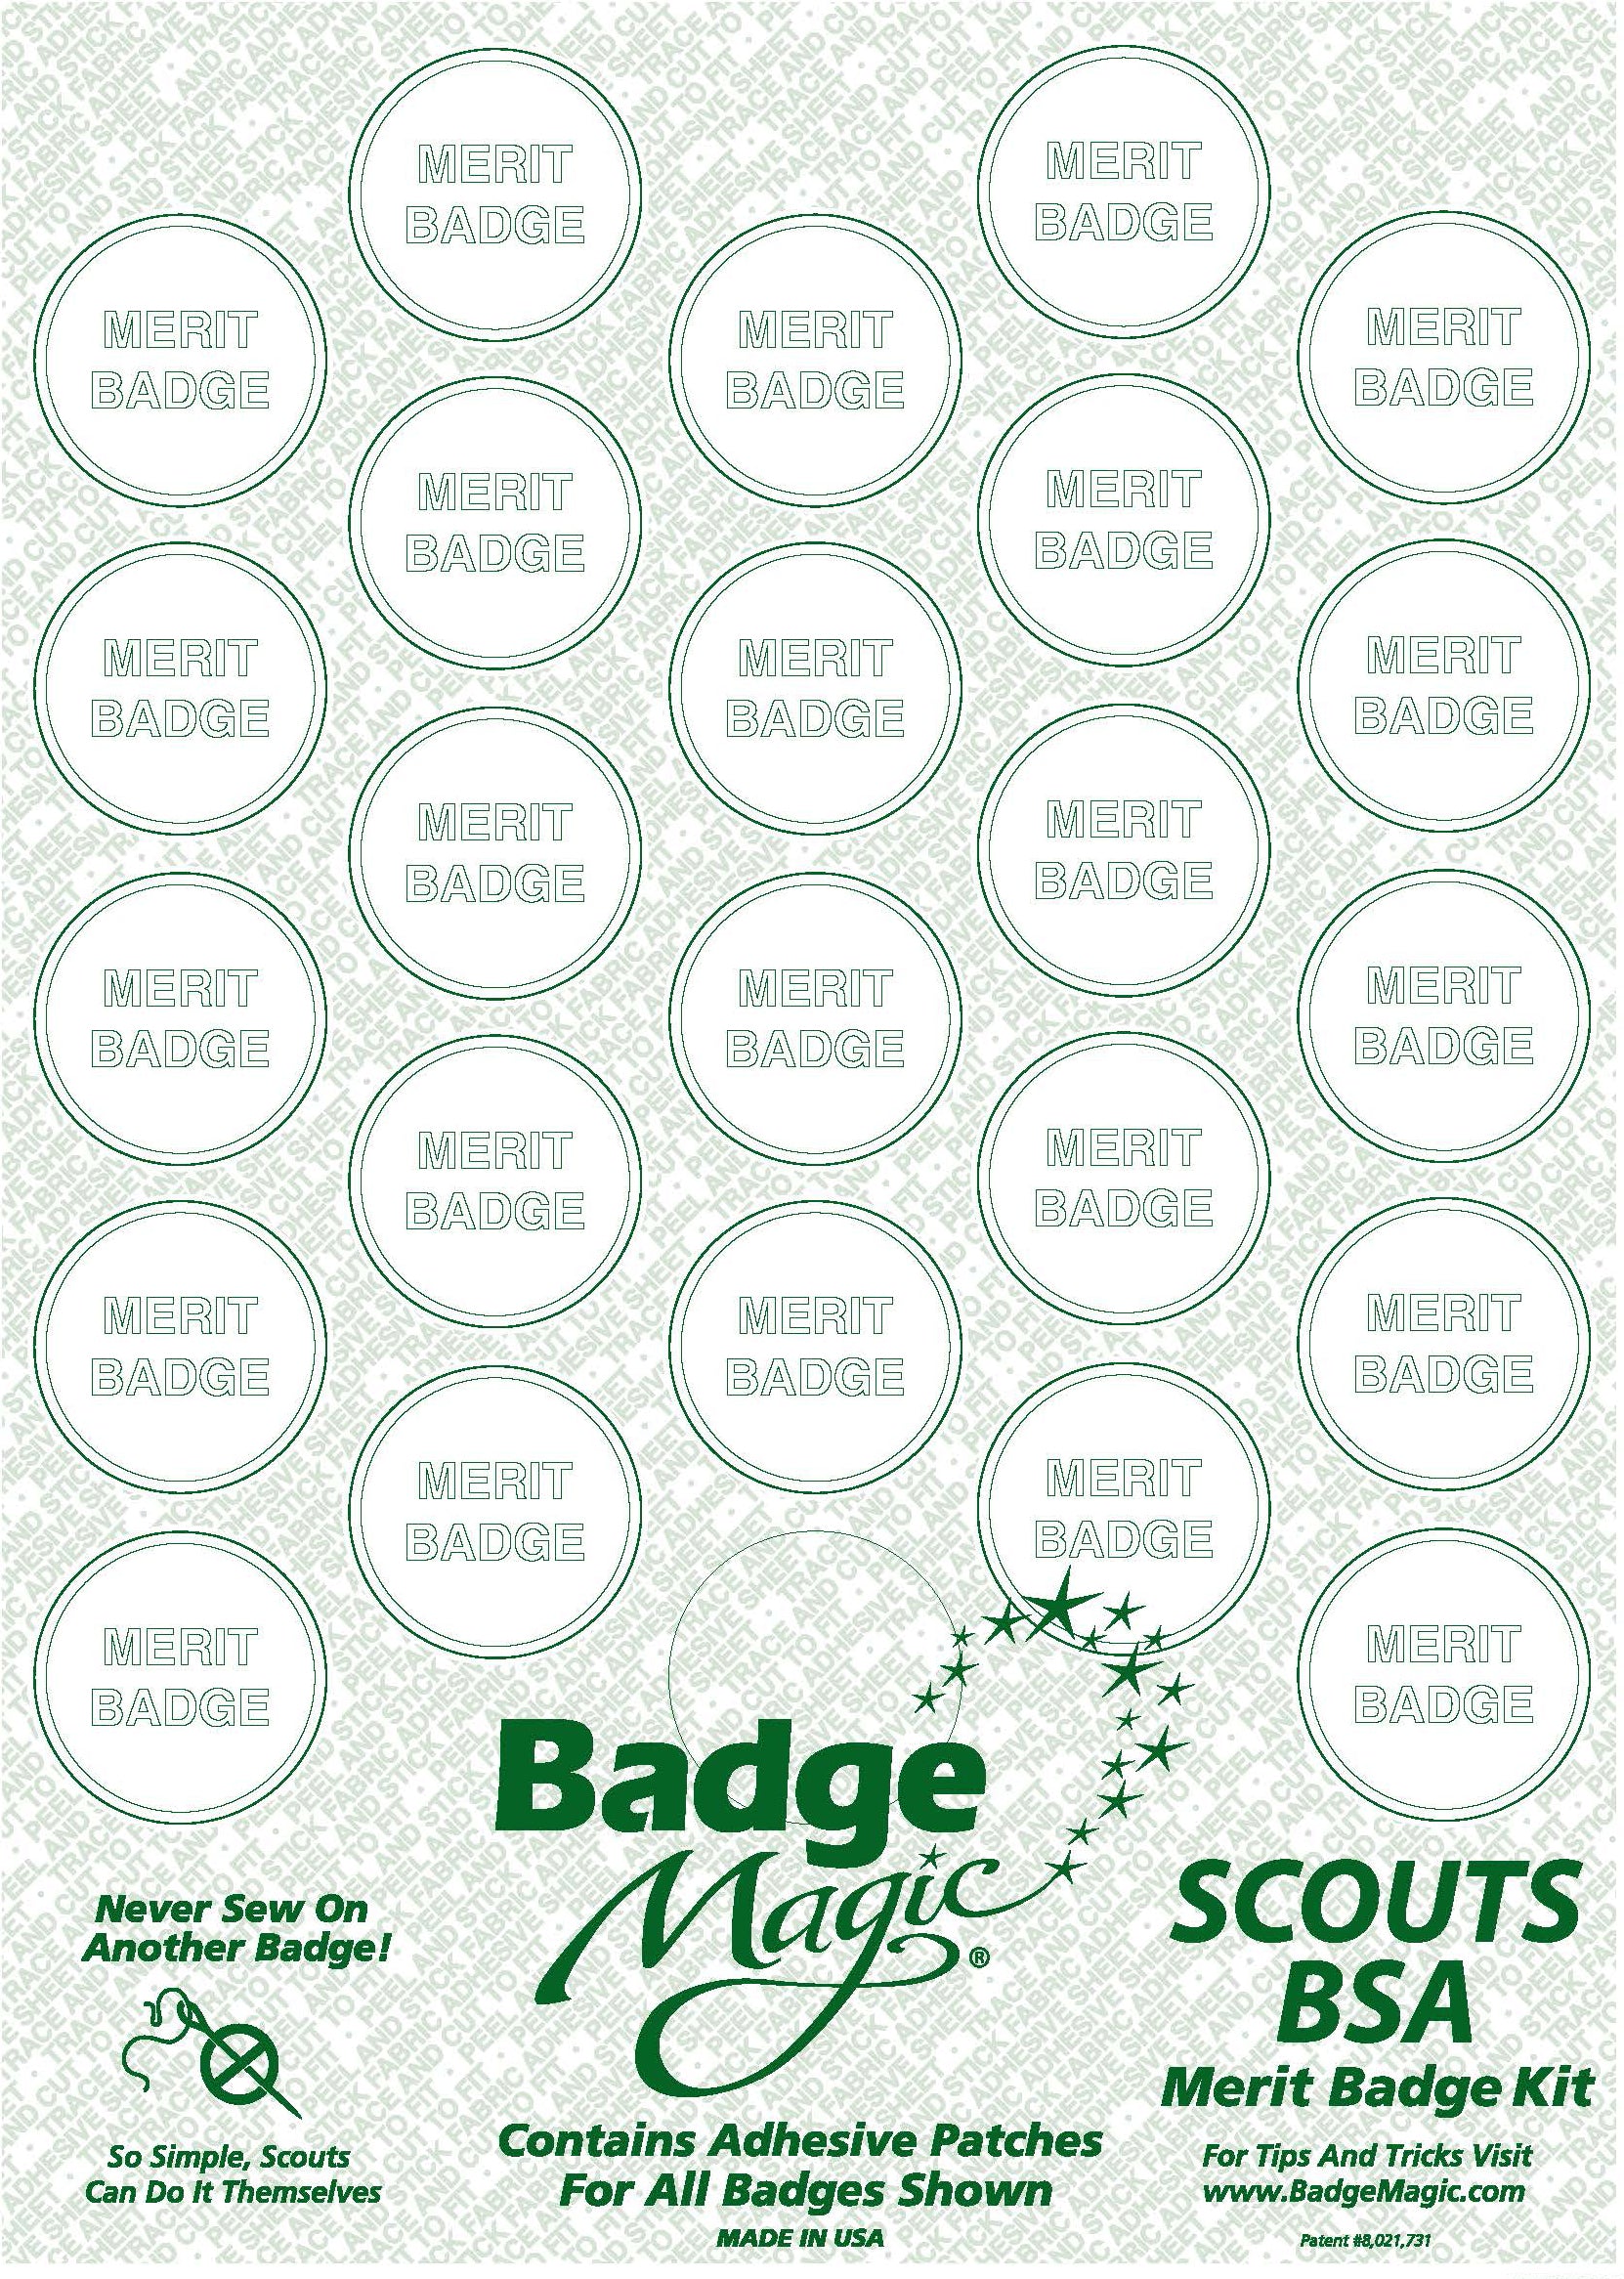 Tips for removing badge magic? : r/BSA